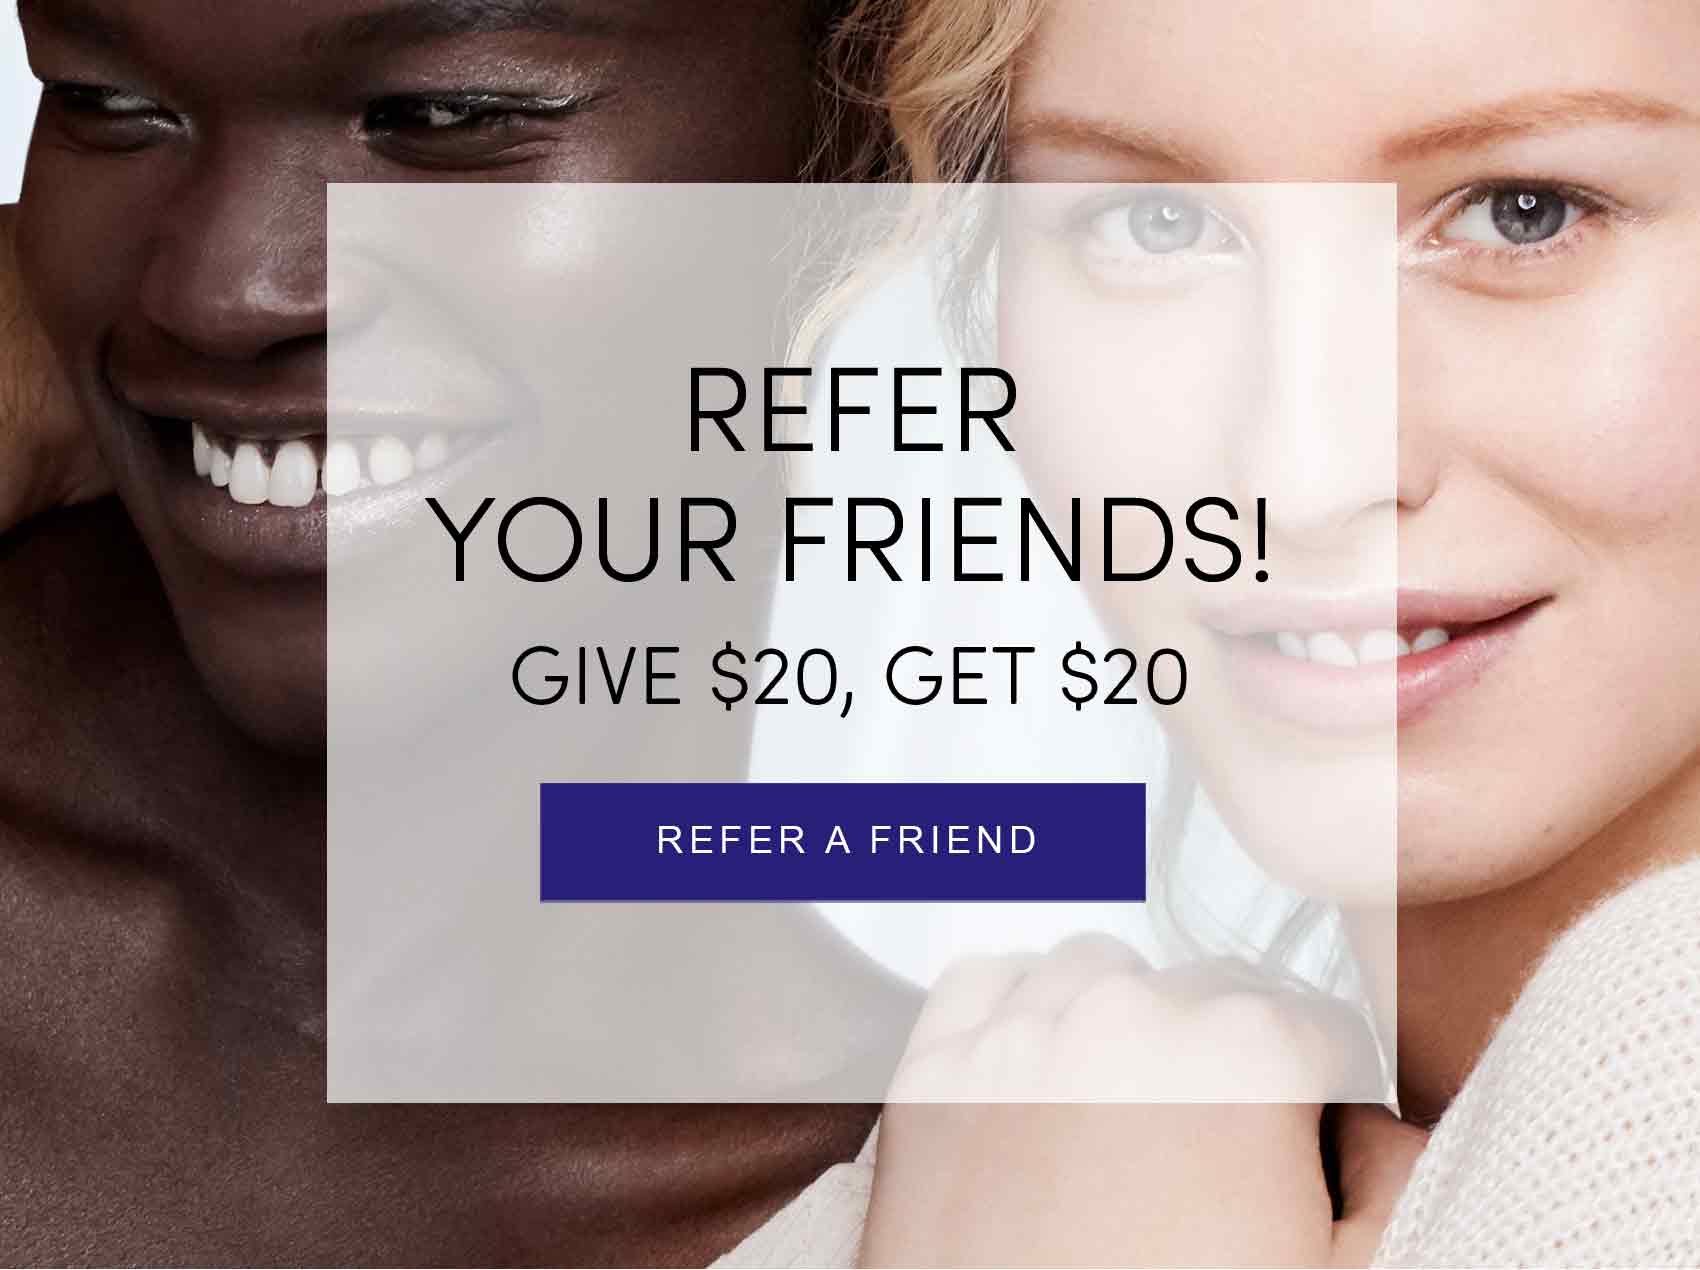 Refer Your Friends!